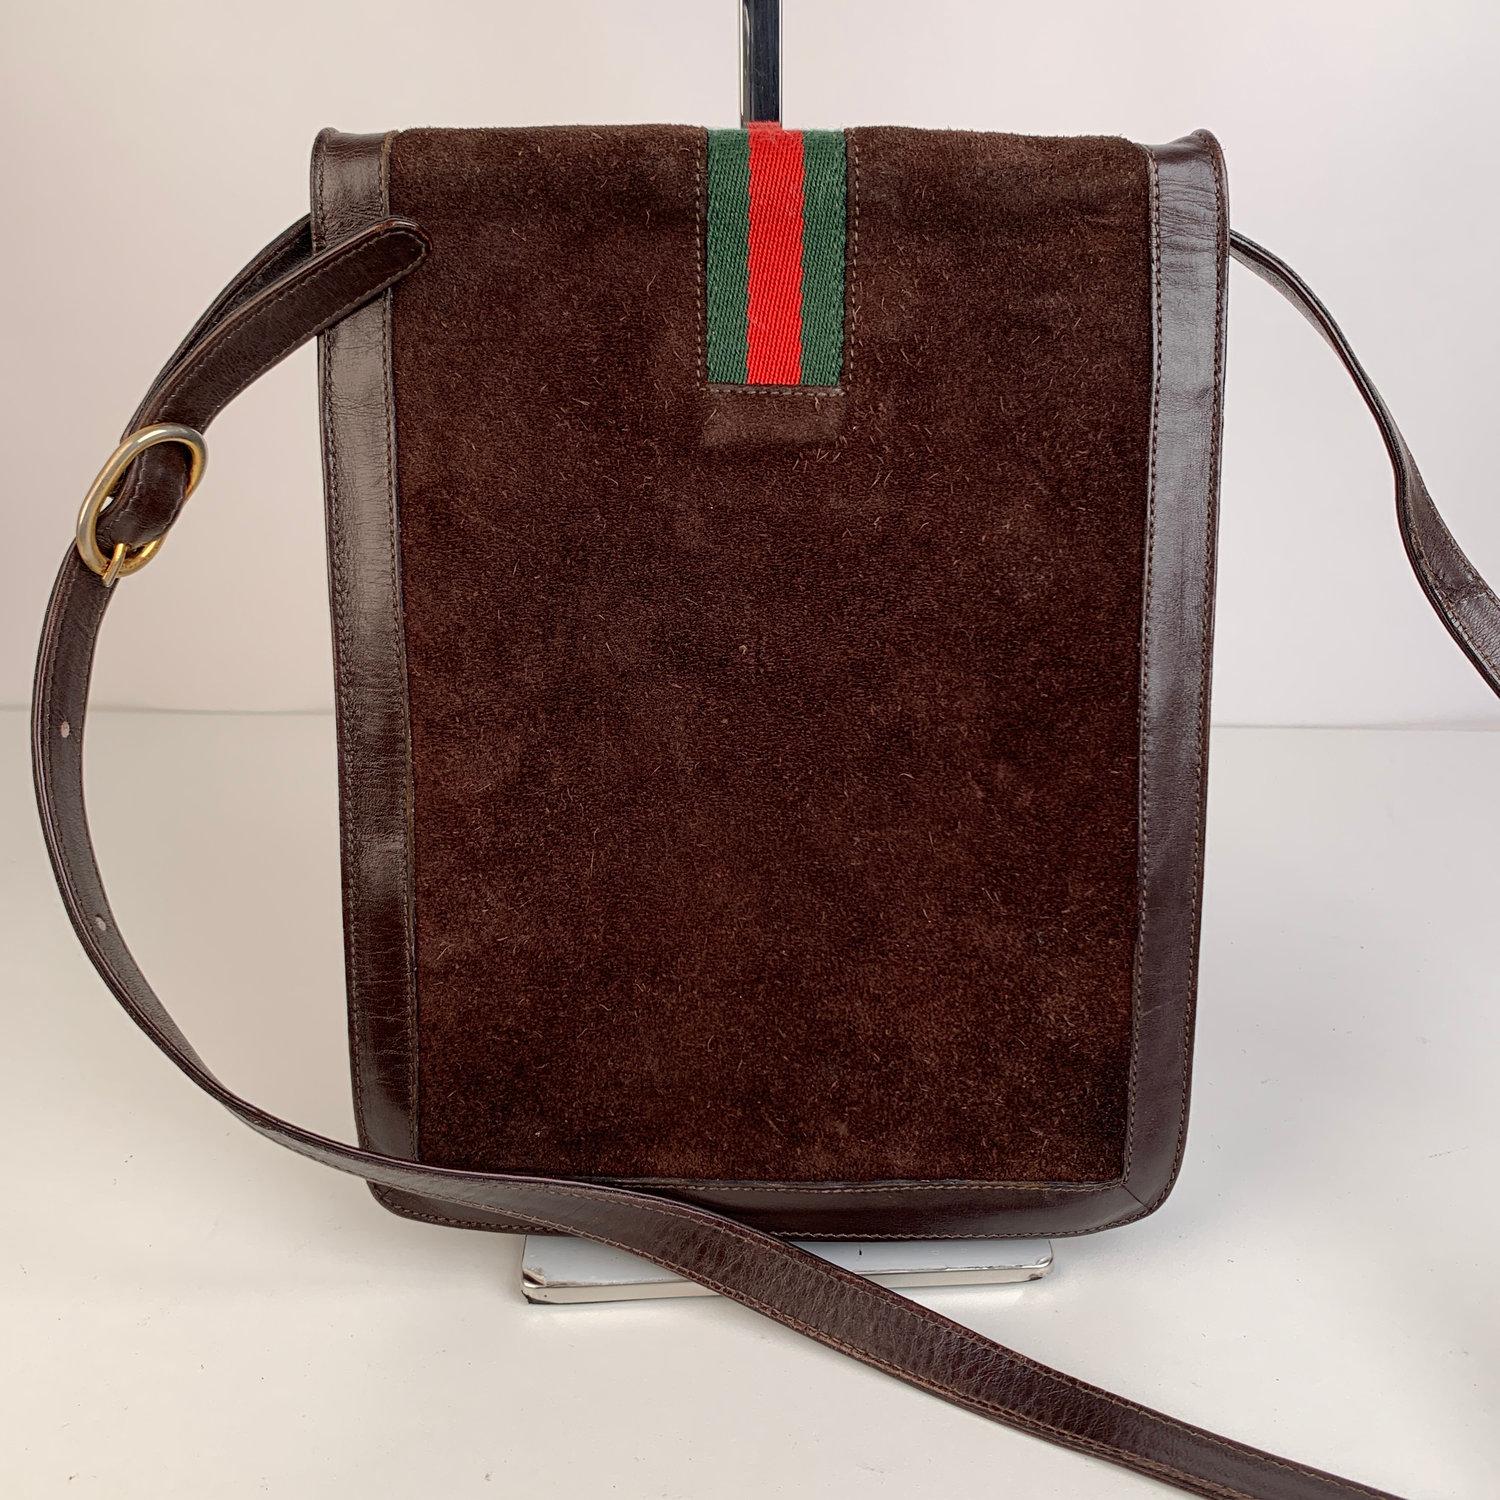 Women's Gucci Vintage Brown Suede Crossbody Bags Men Purse with Stripes